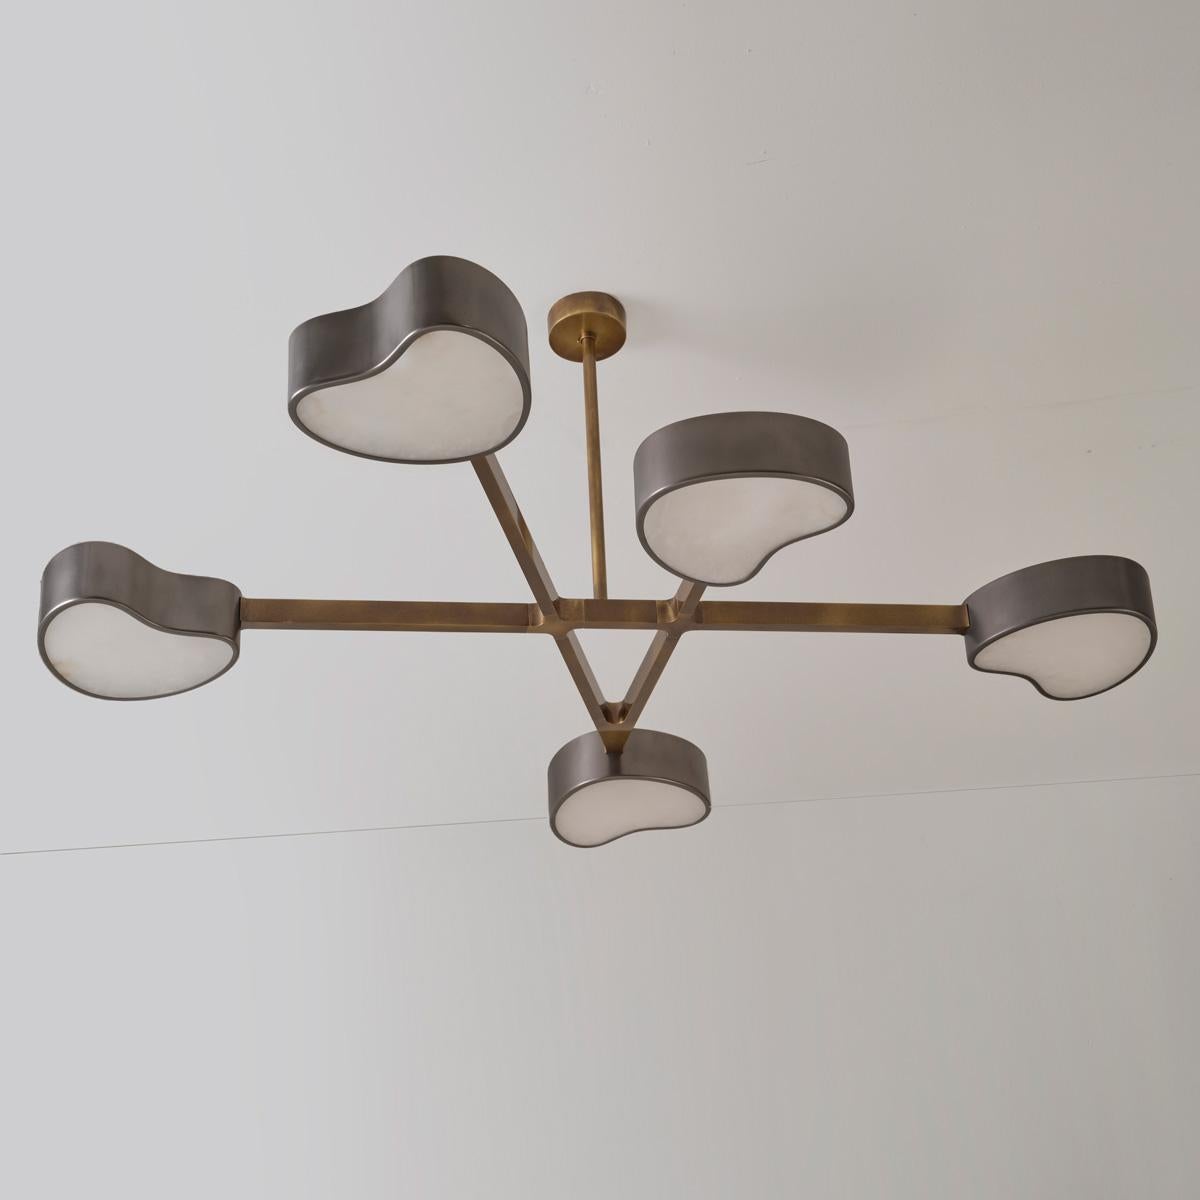 Italian Cuore N.5 Ceiling Light by Gaspare Asaro. Peltro and Bronze Finish For Sale